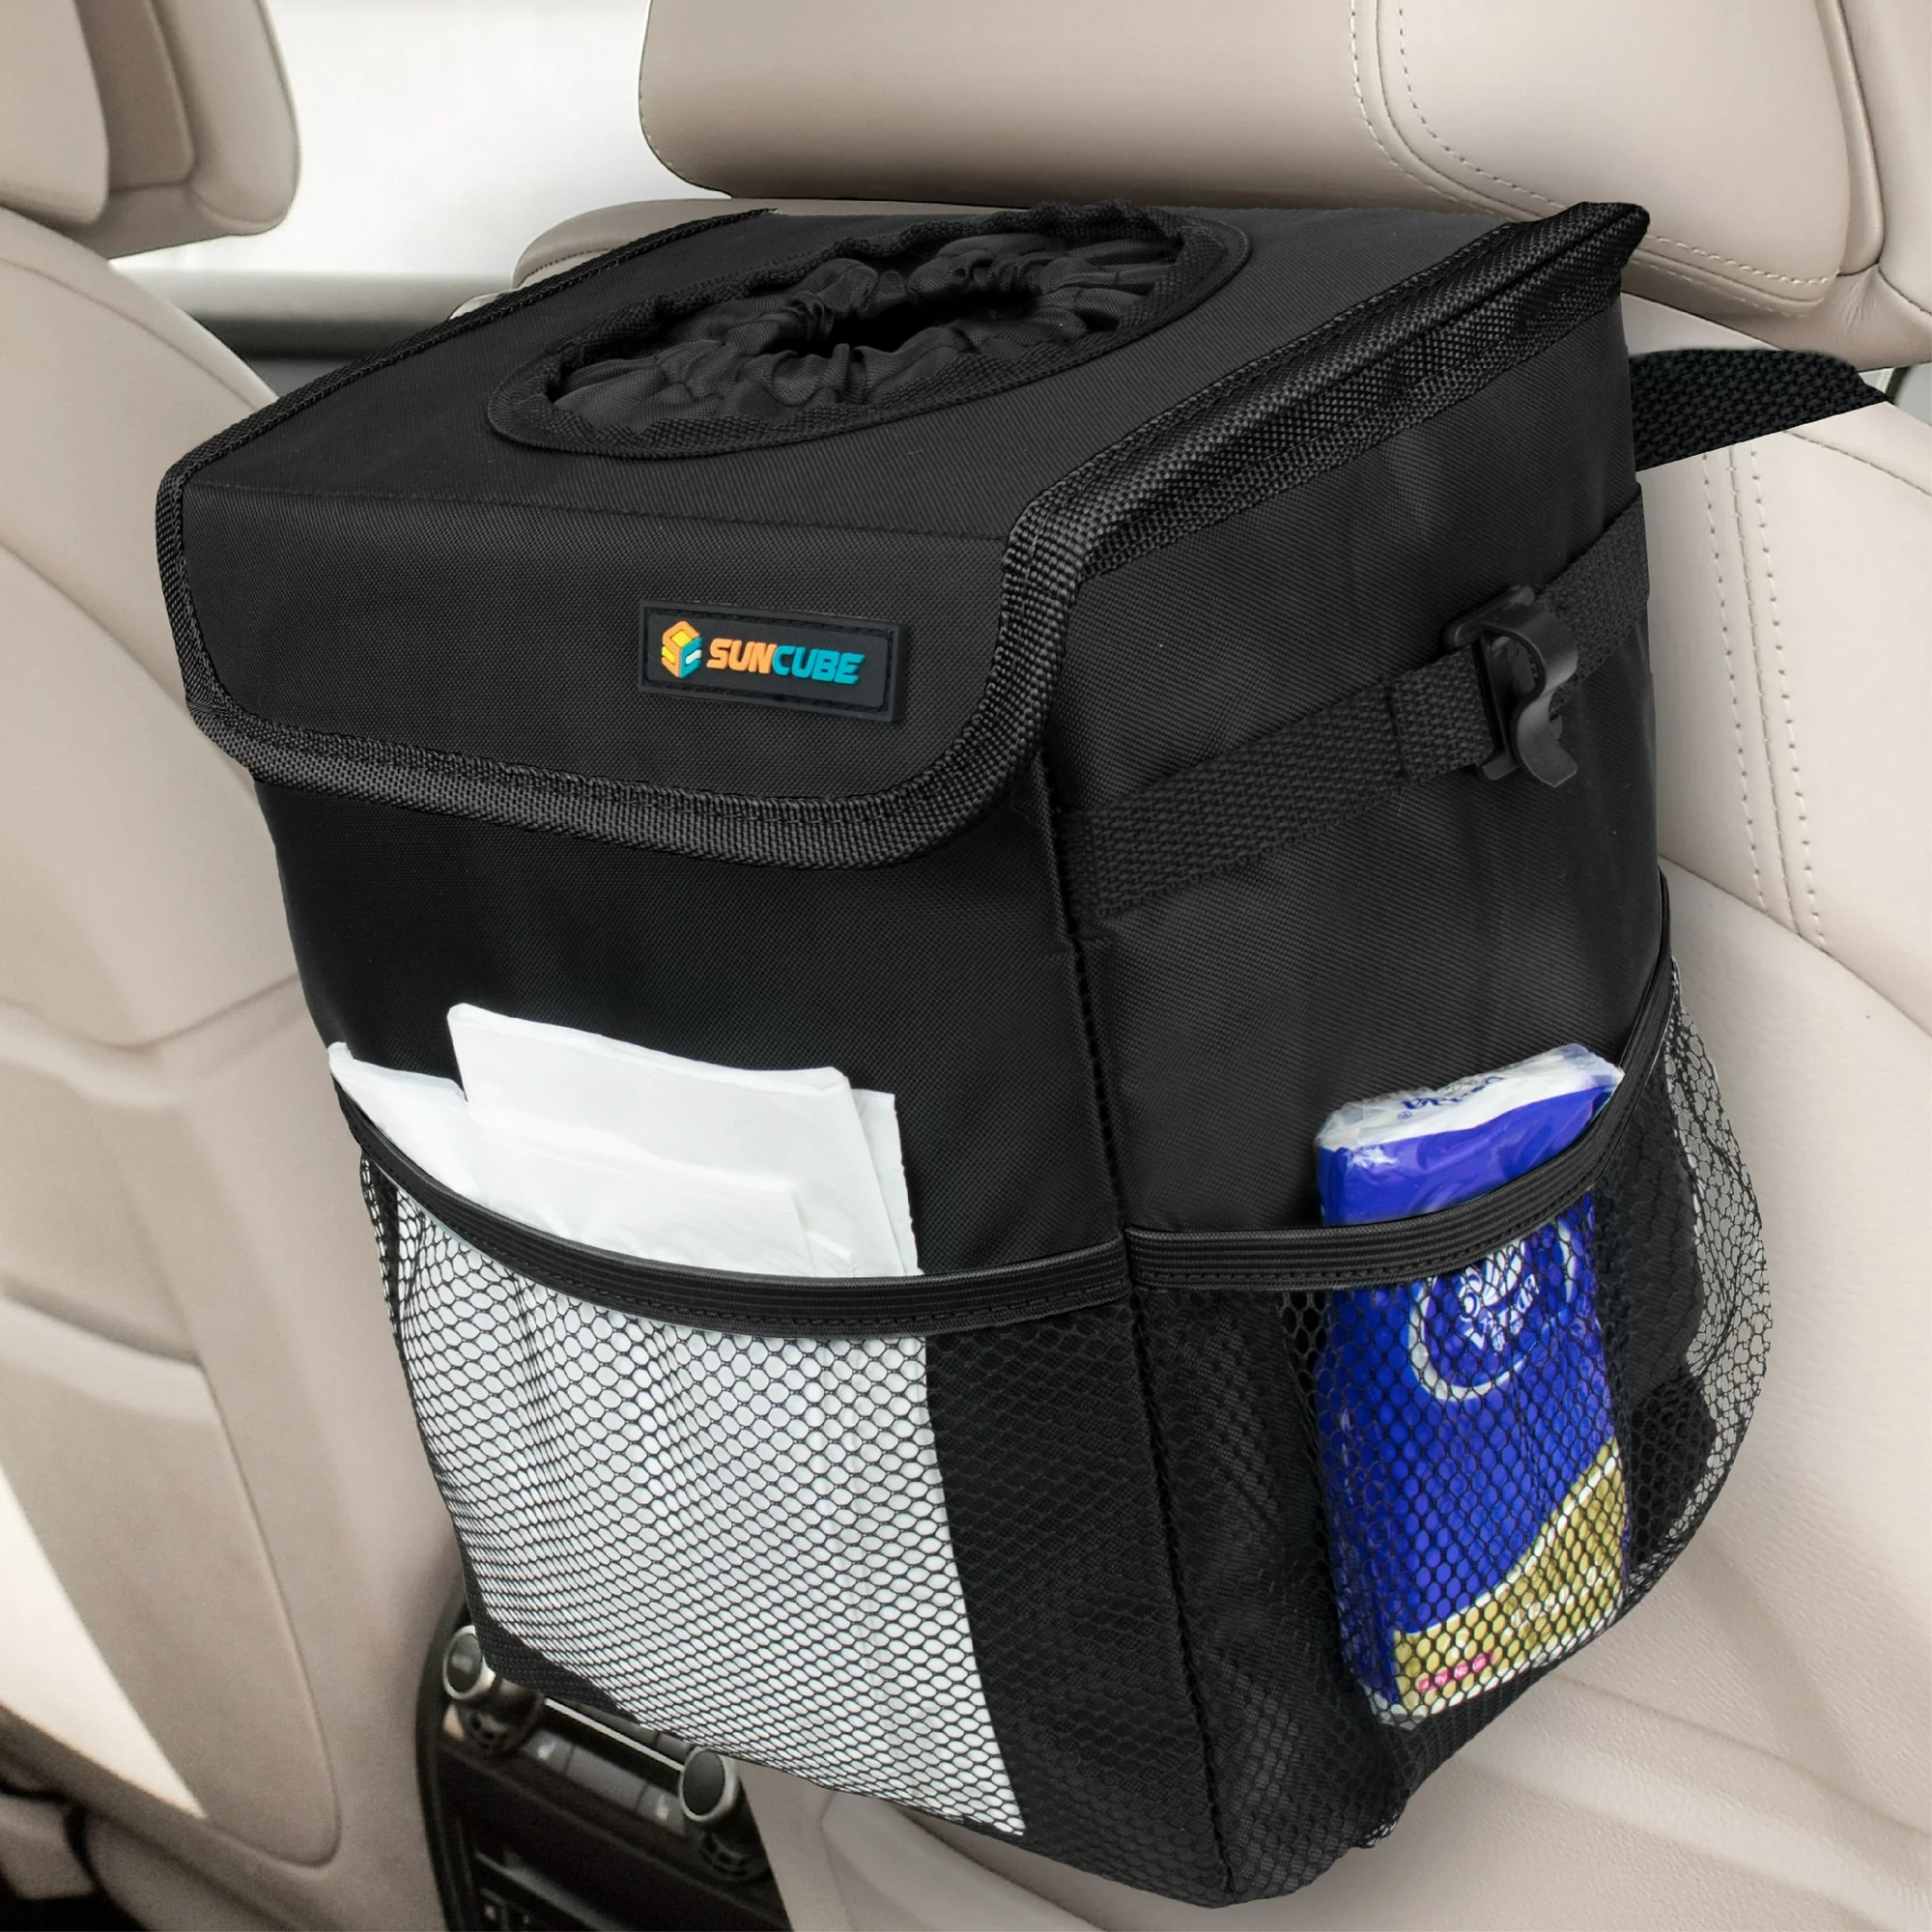 Black soft waste bin attached to back of passenger seat